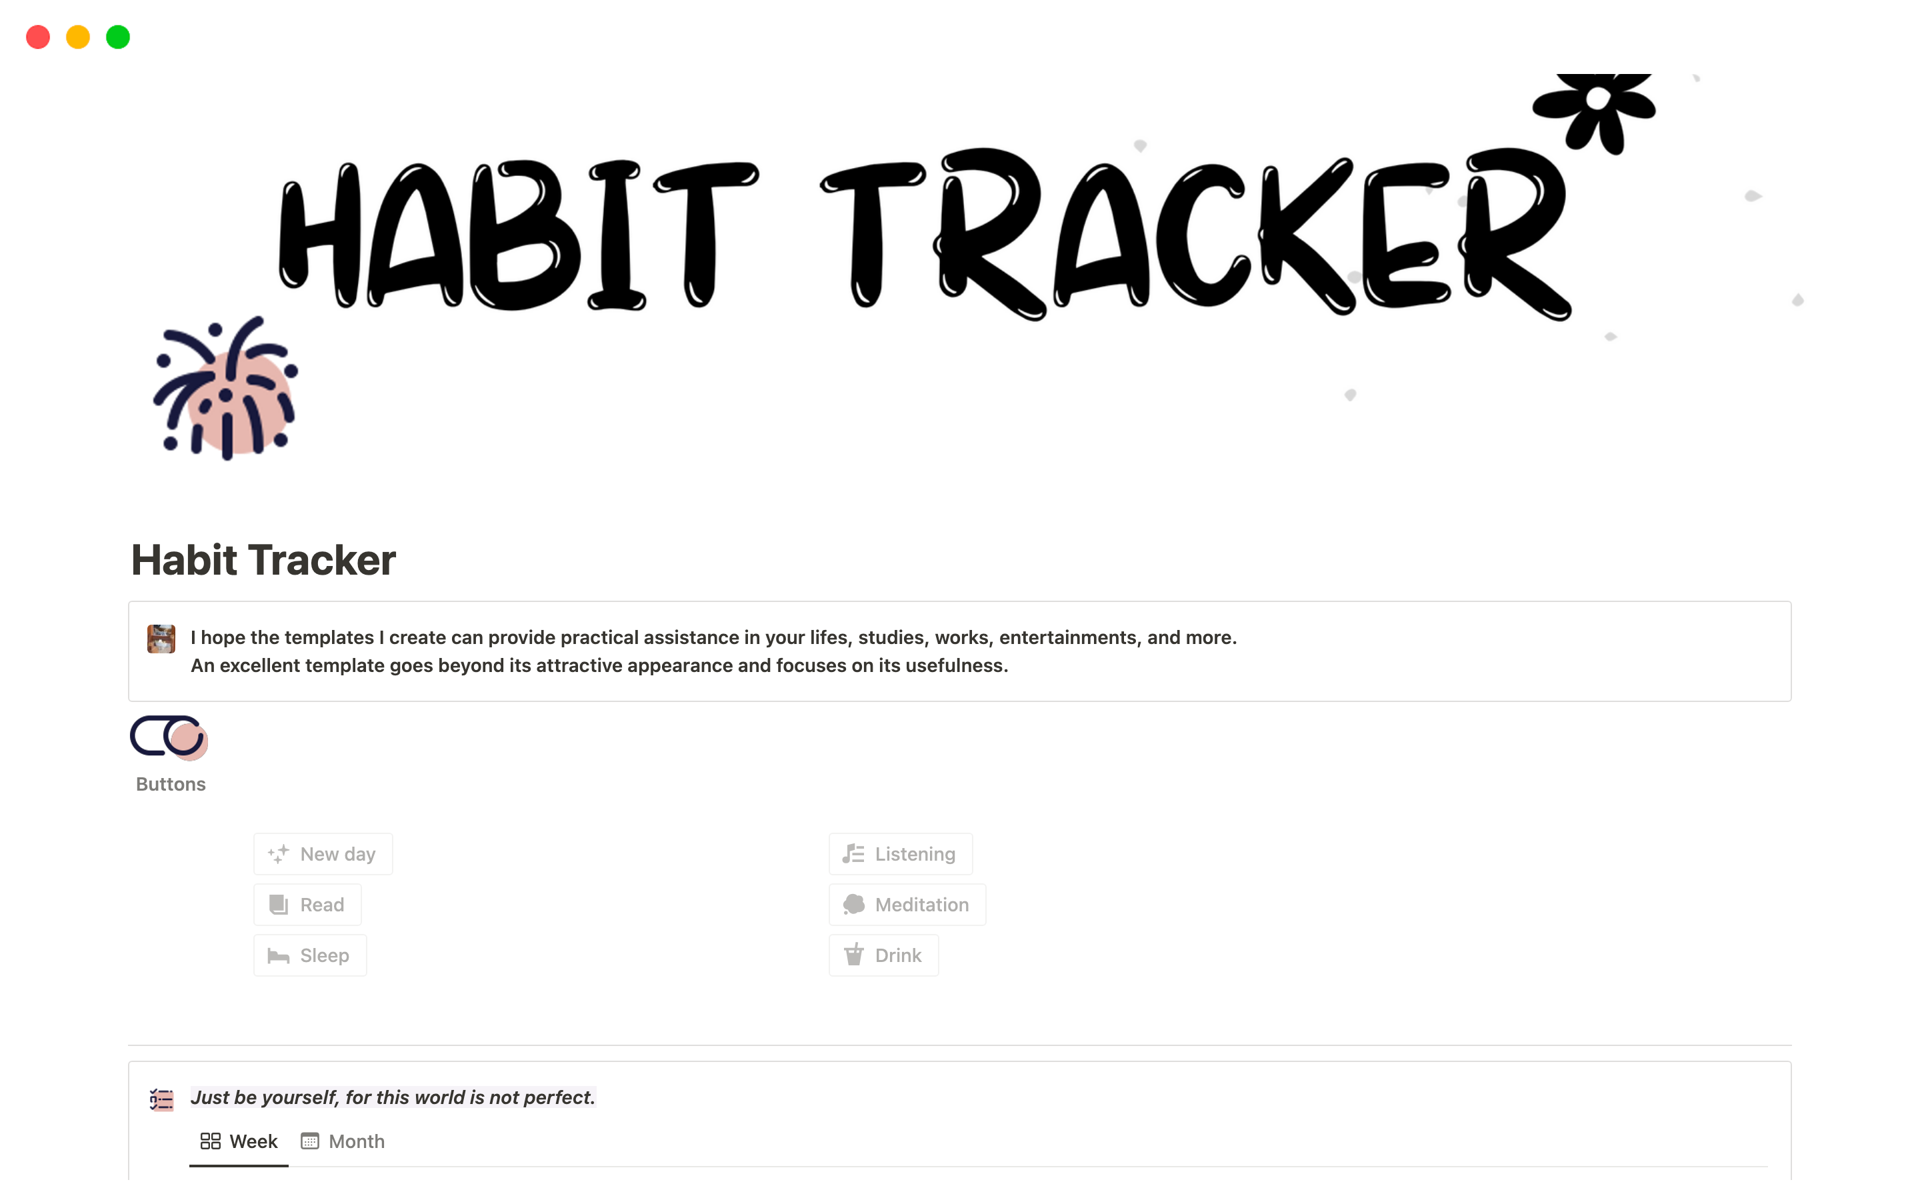 Effortlessly track your habits with the help of this exceptional Notion habit tracker template.